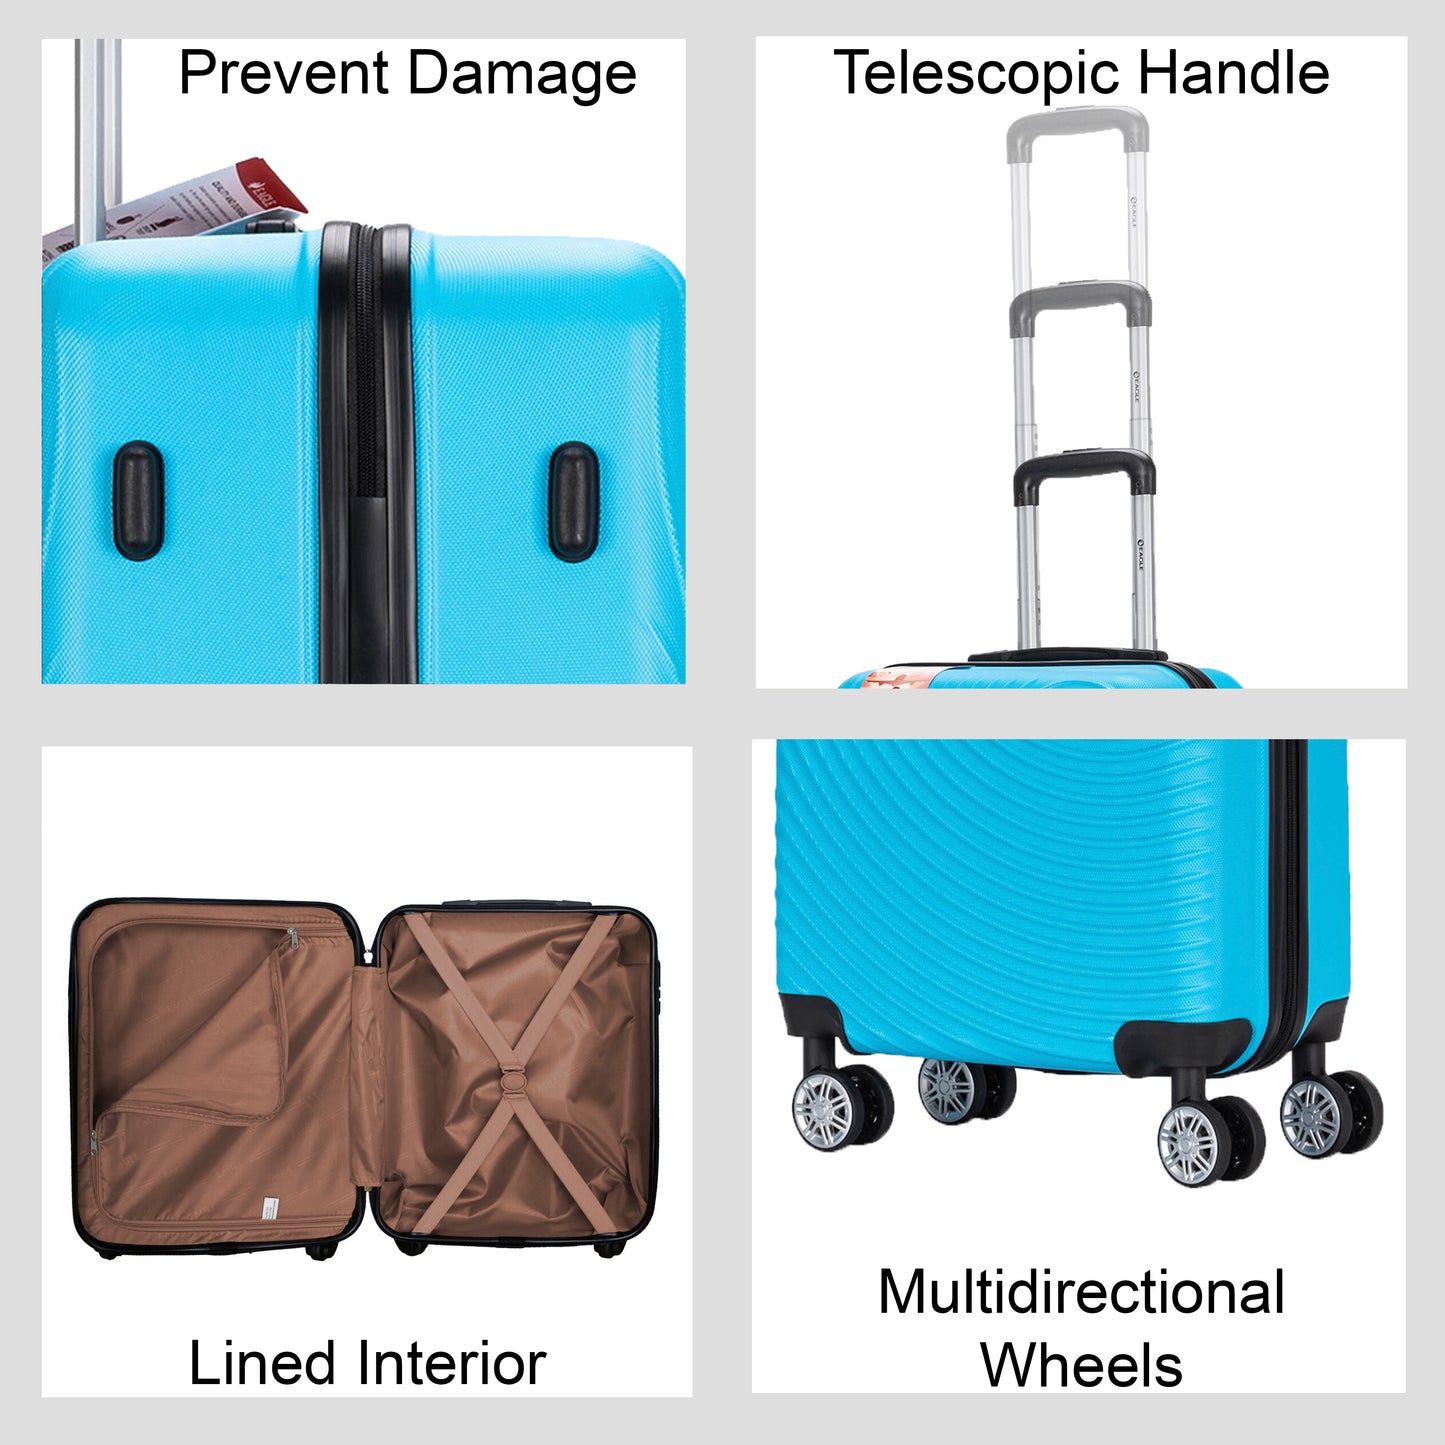 Circle ABS Hard Shell Suitcase Sky Blue